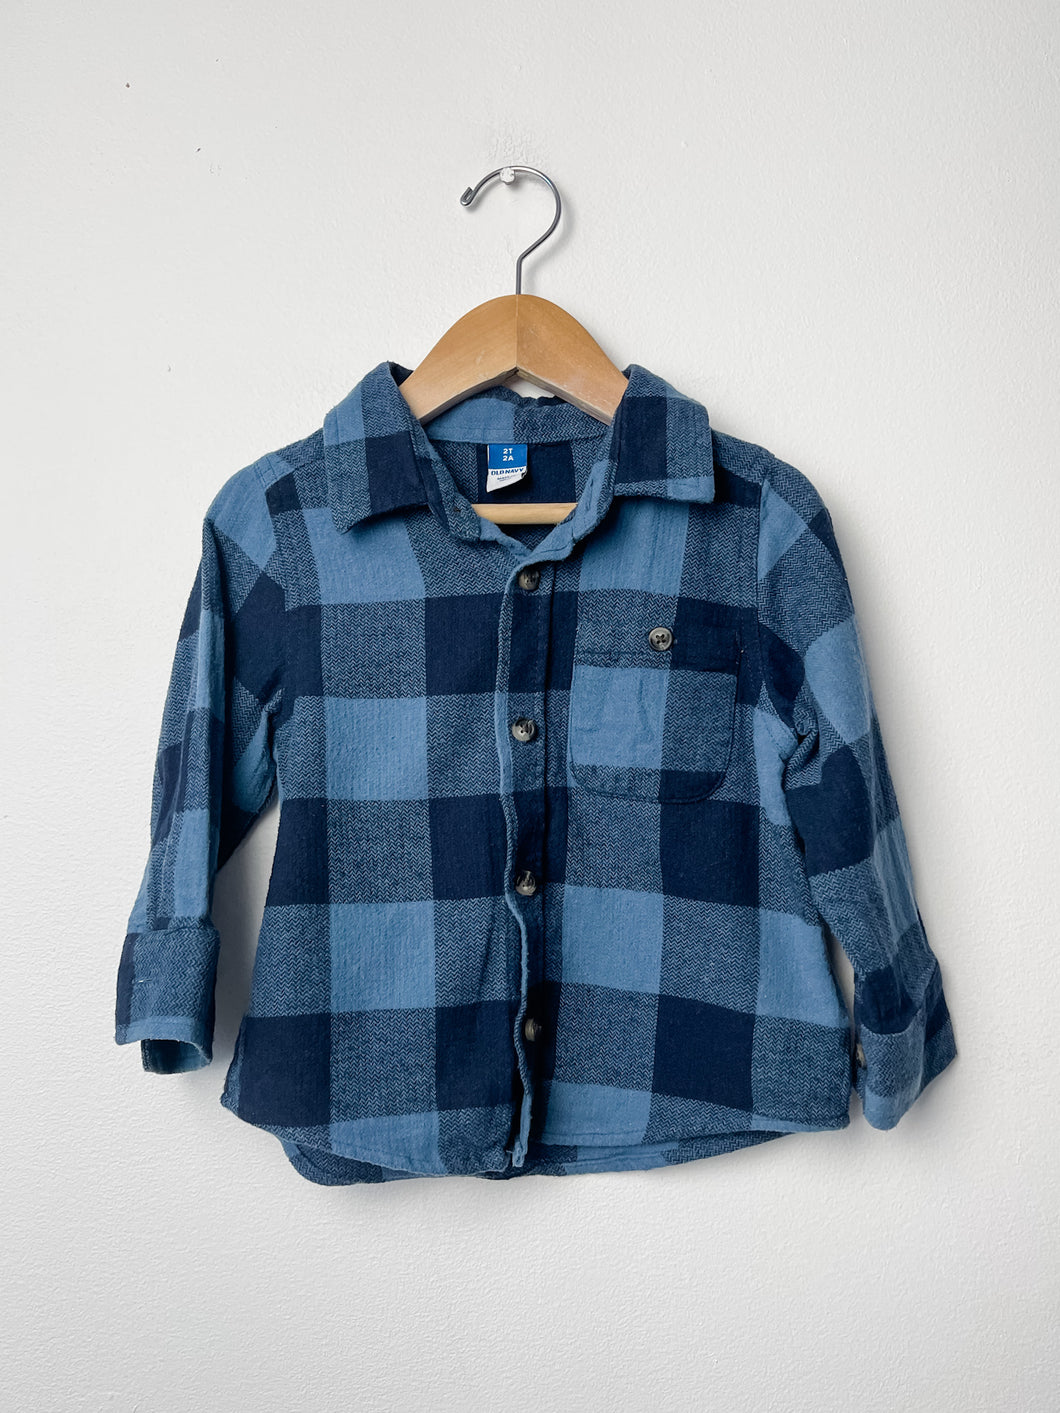 Plaid Old Navy Shirt Size 2T